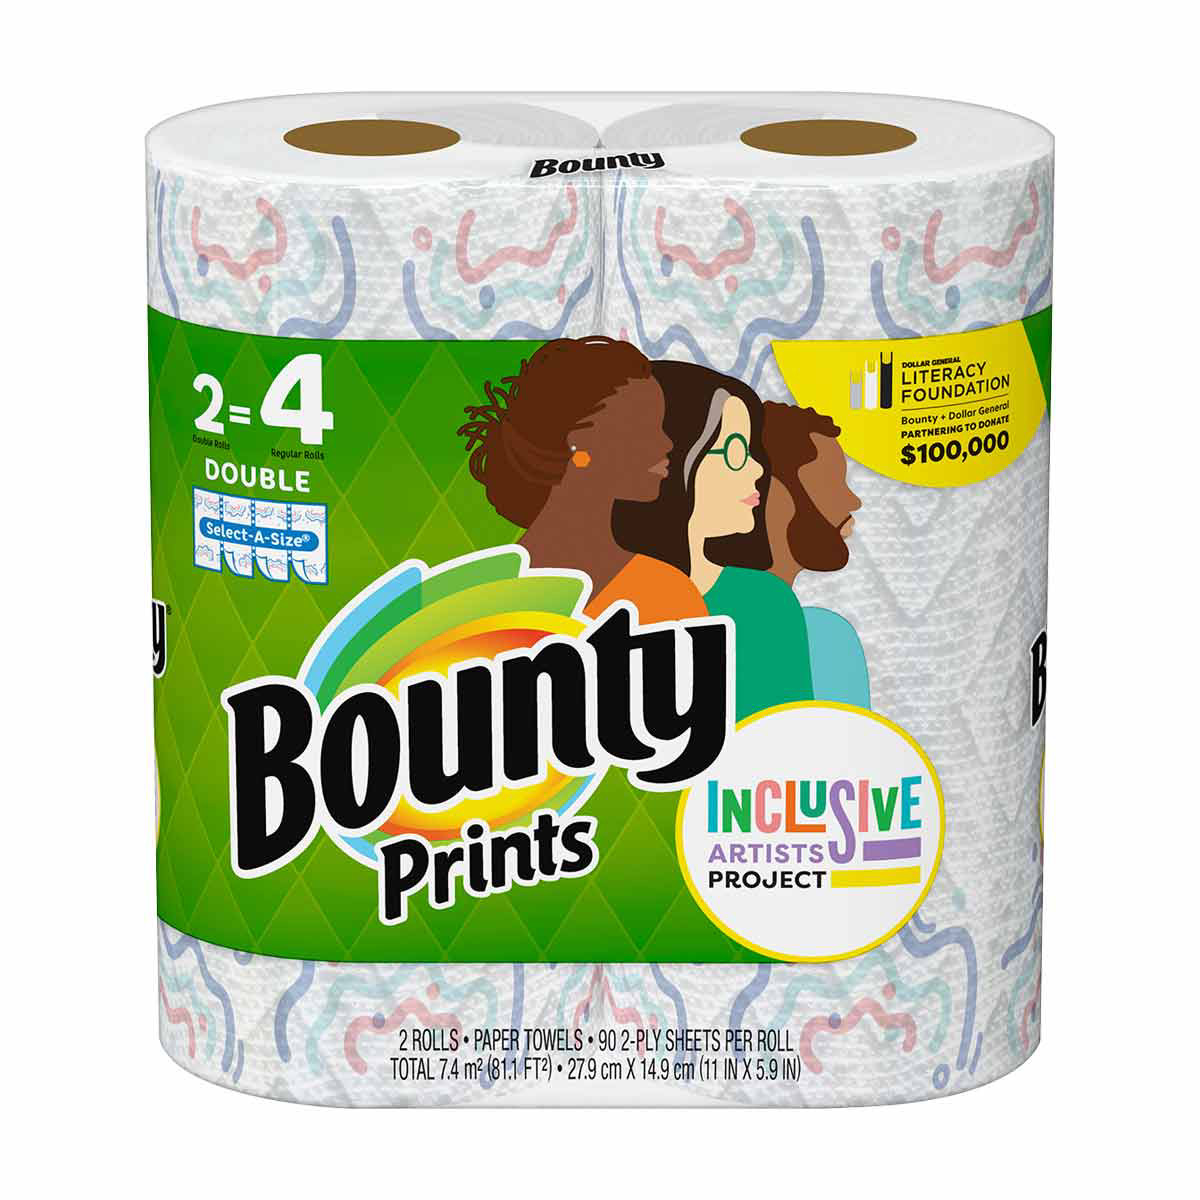 Bounty Prints Select-A-Size Double Rolls Paper Towels